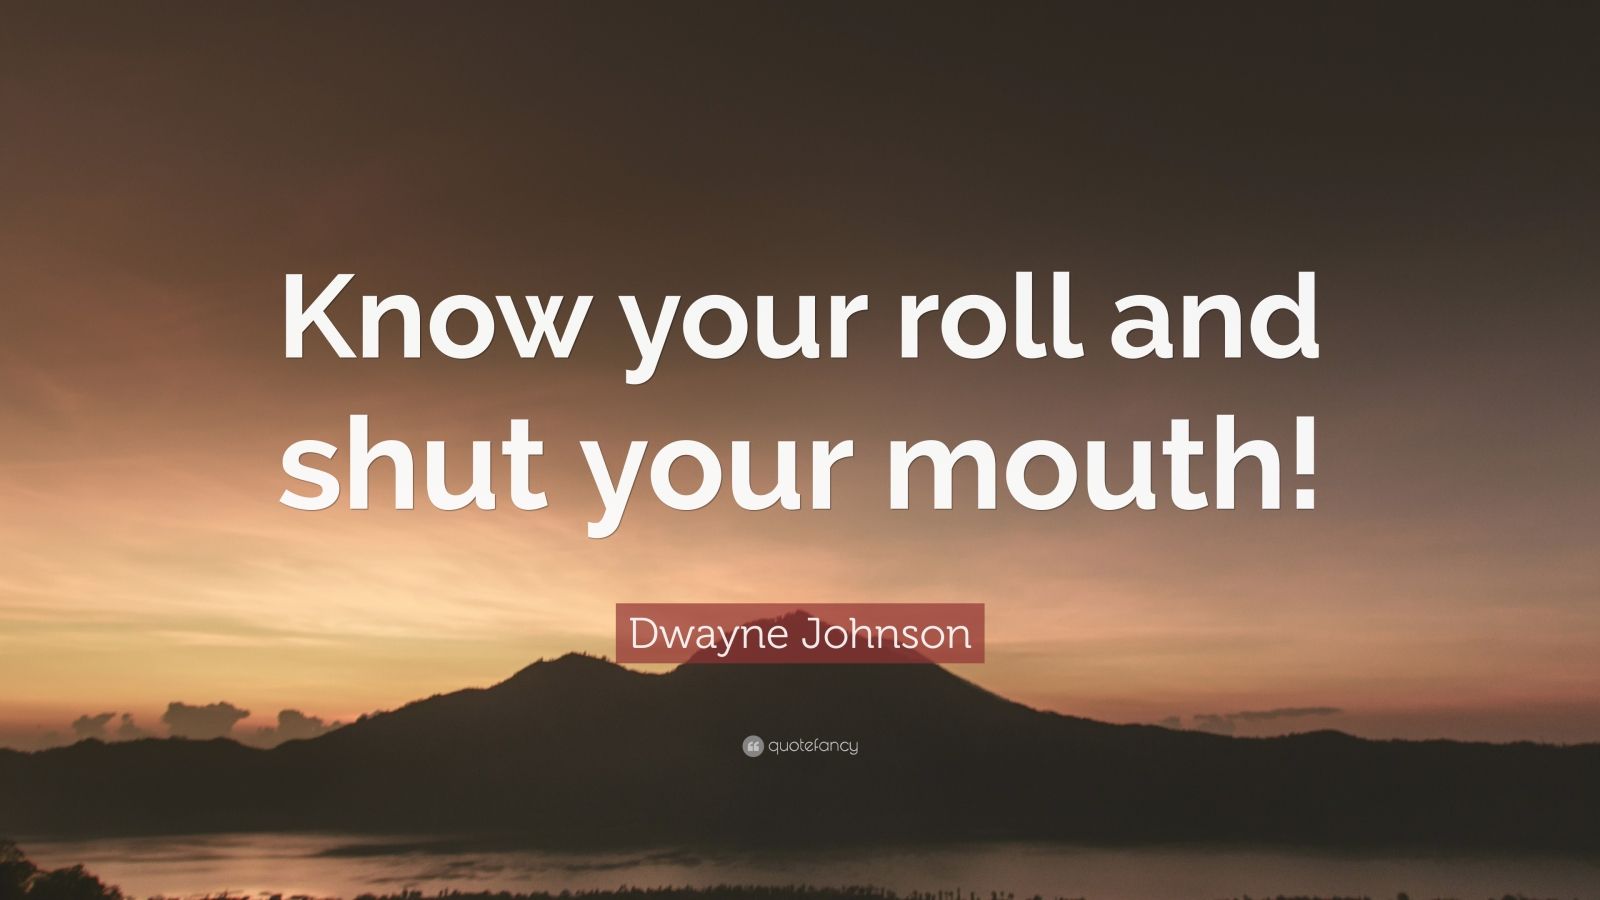 Dwayne Johnson Quote: "Know your roll and shut your mouth ...